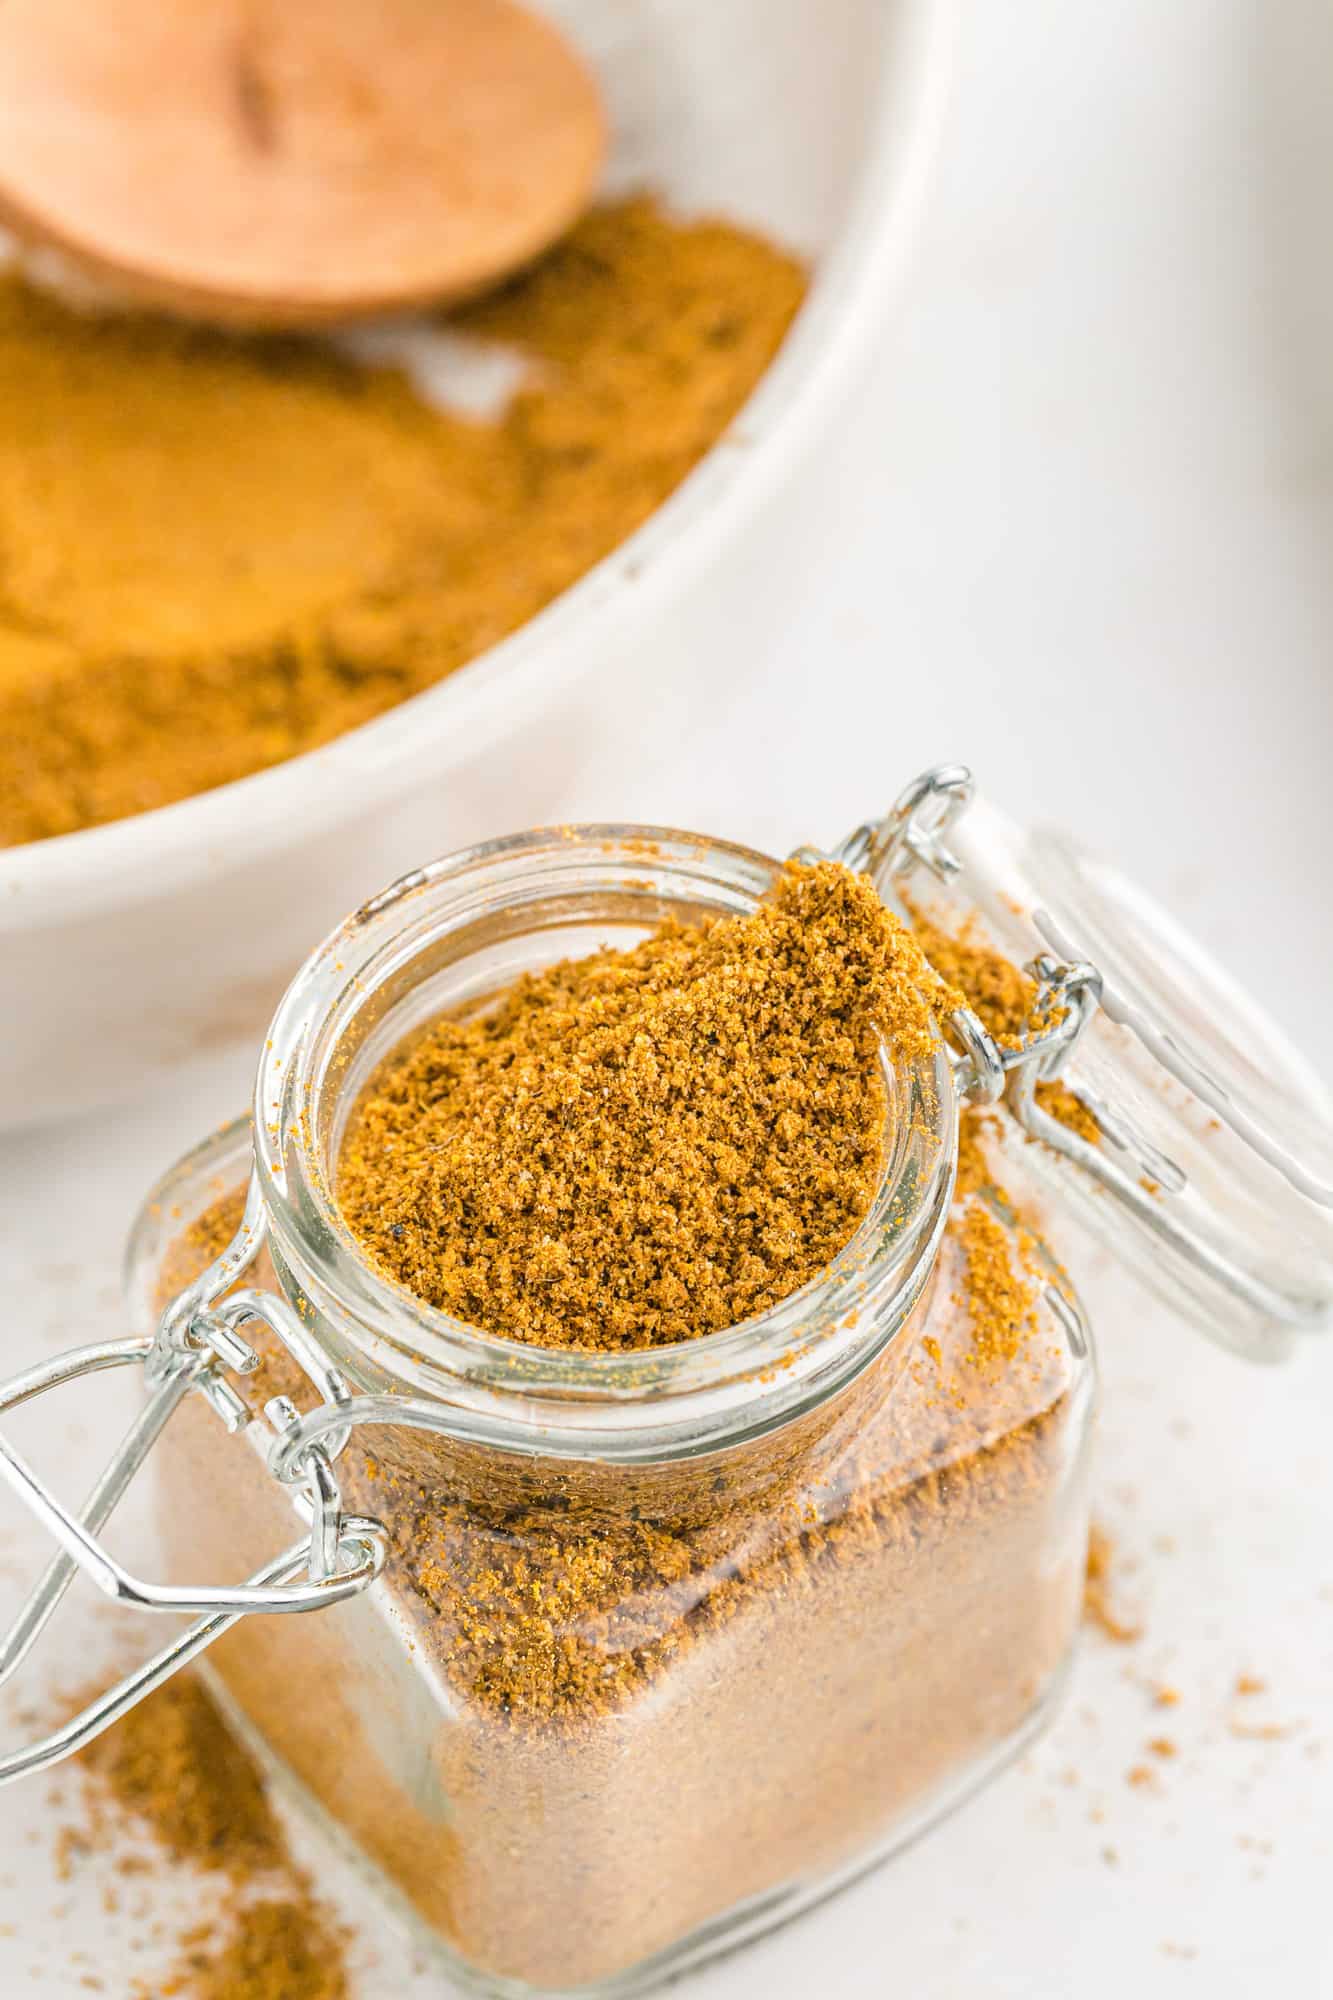 Curry powder blend in a small glass jar.